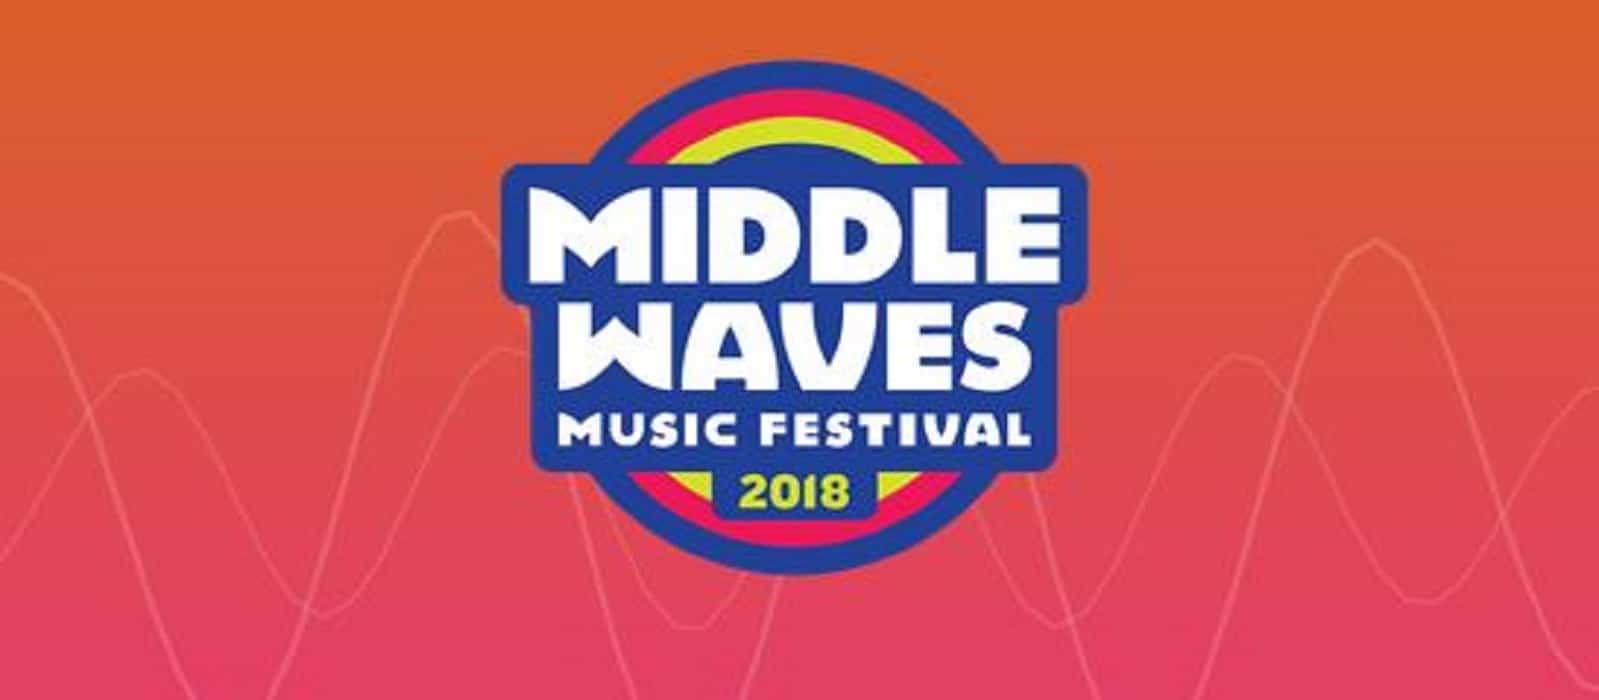 2018 Middle Waves Music Festival lineup announced - WOWO 1190 AM | 107.5 FM